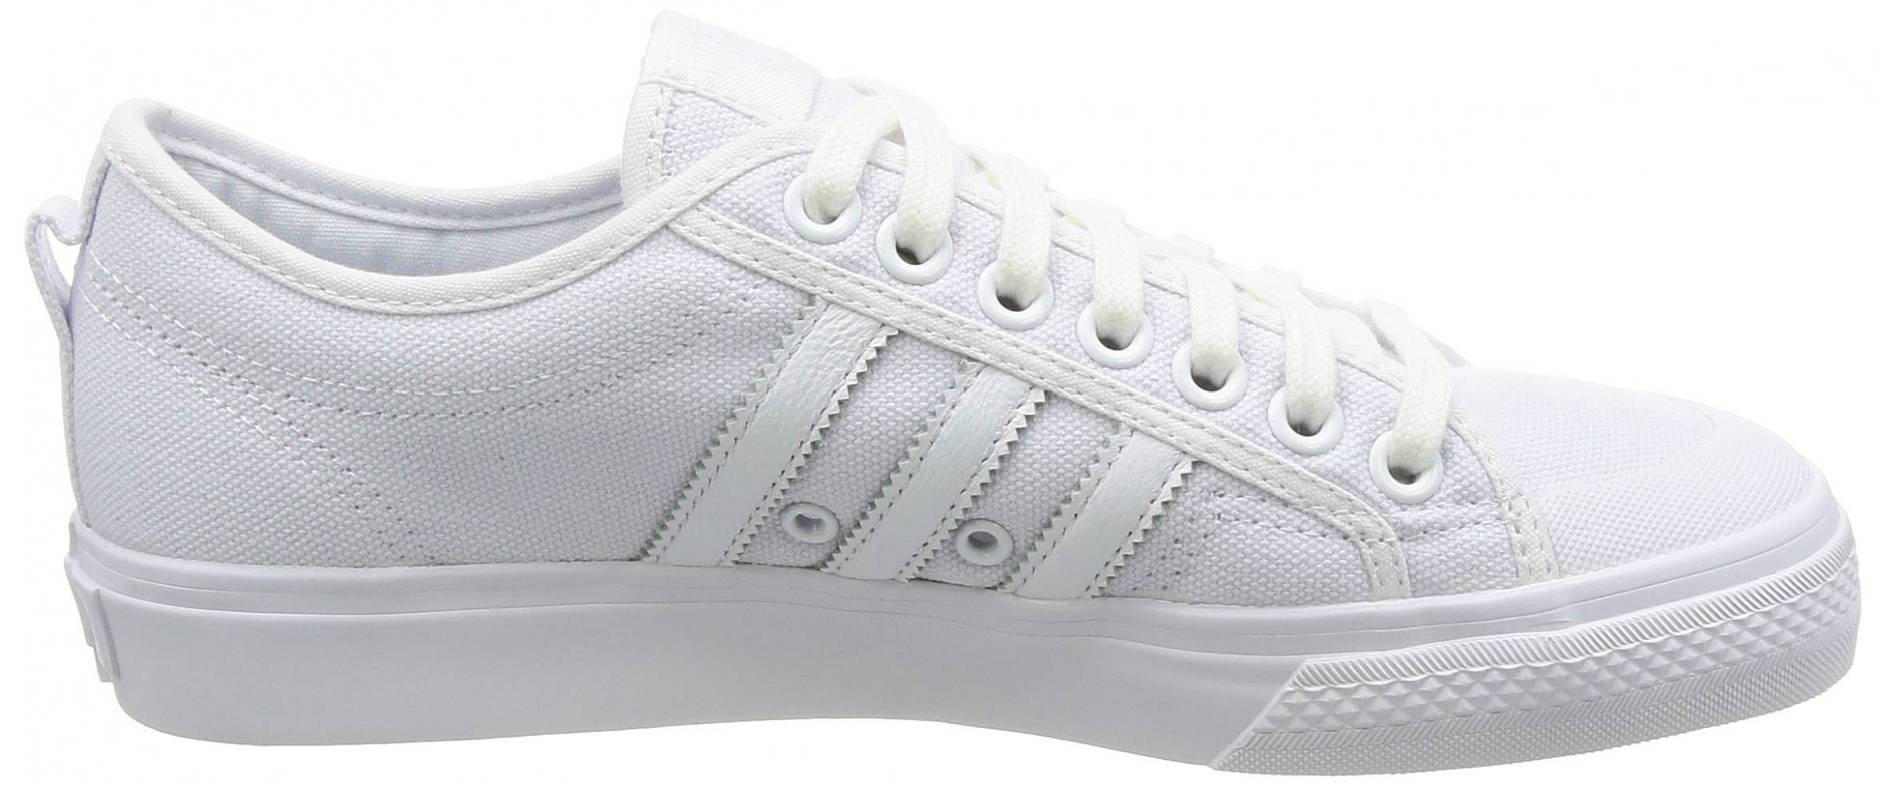 Adidas Nizza Low – Shoes Reviews & Reasons To Buy